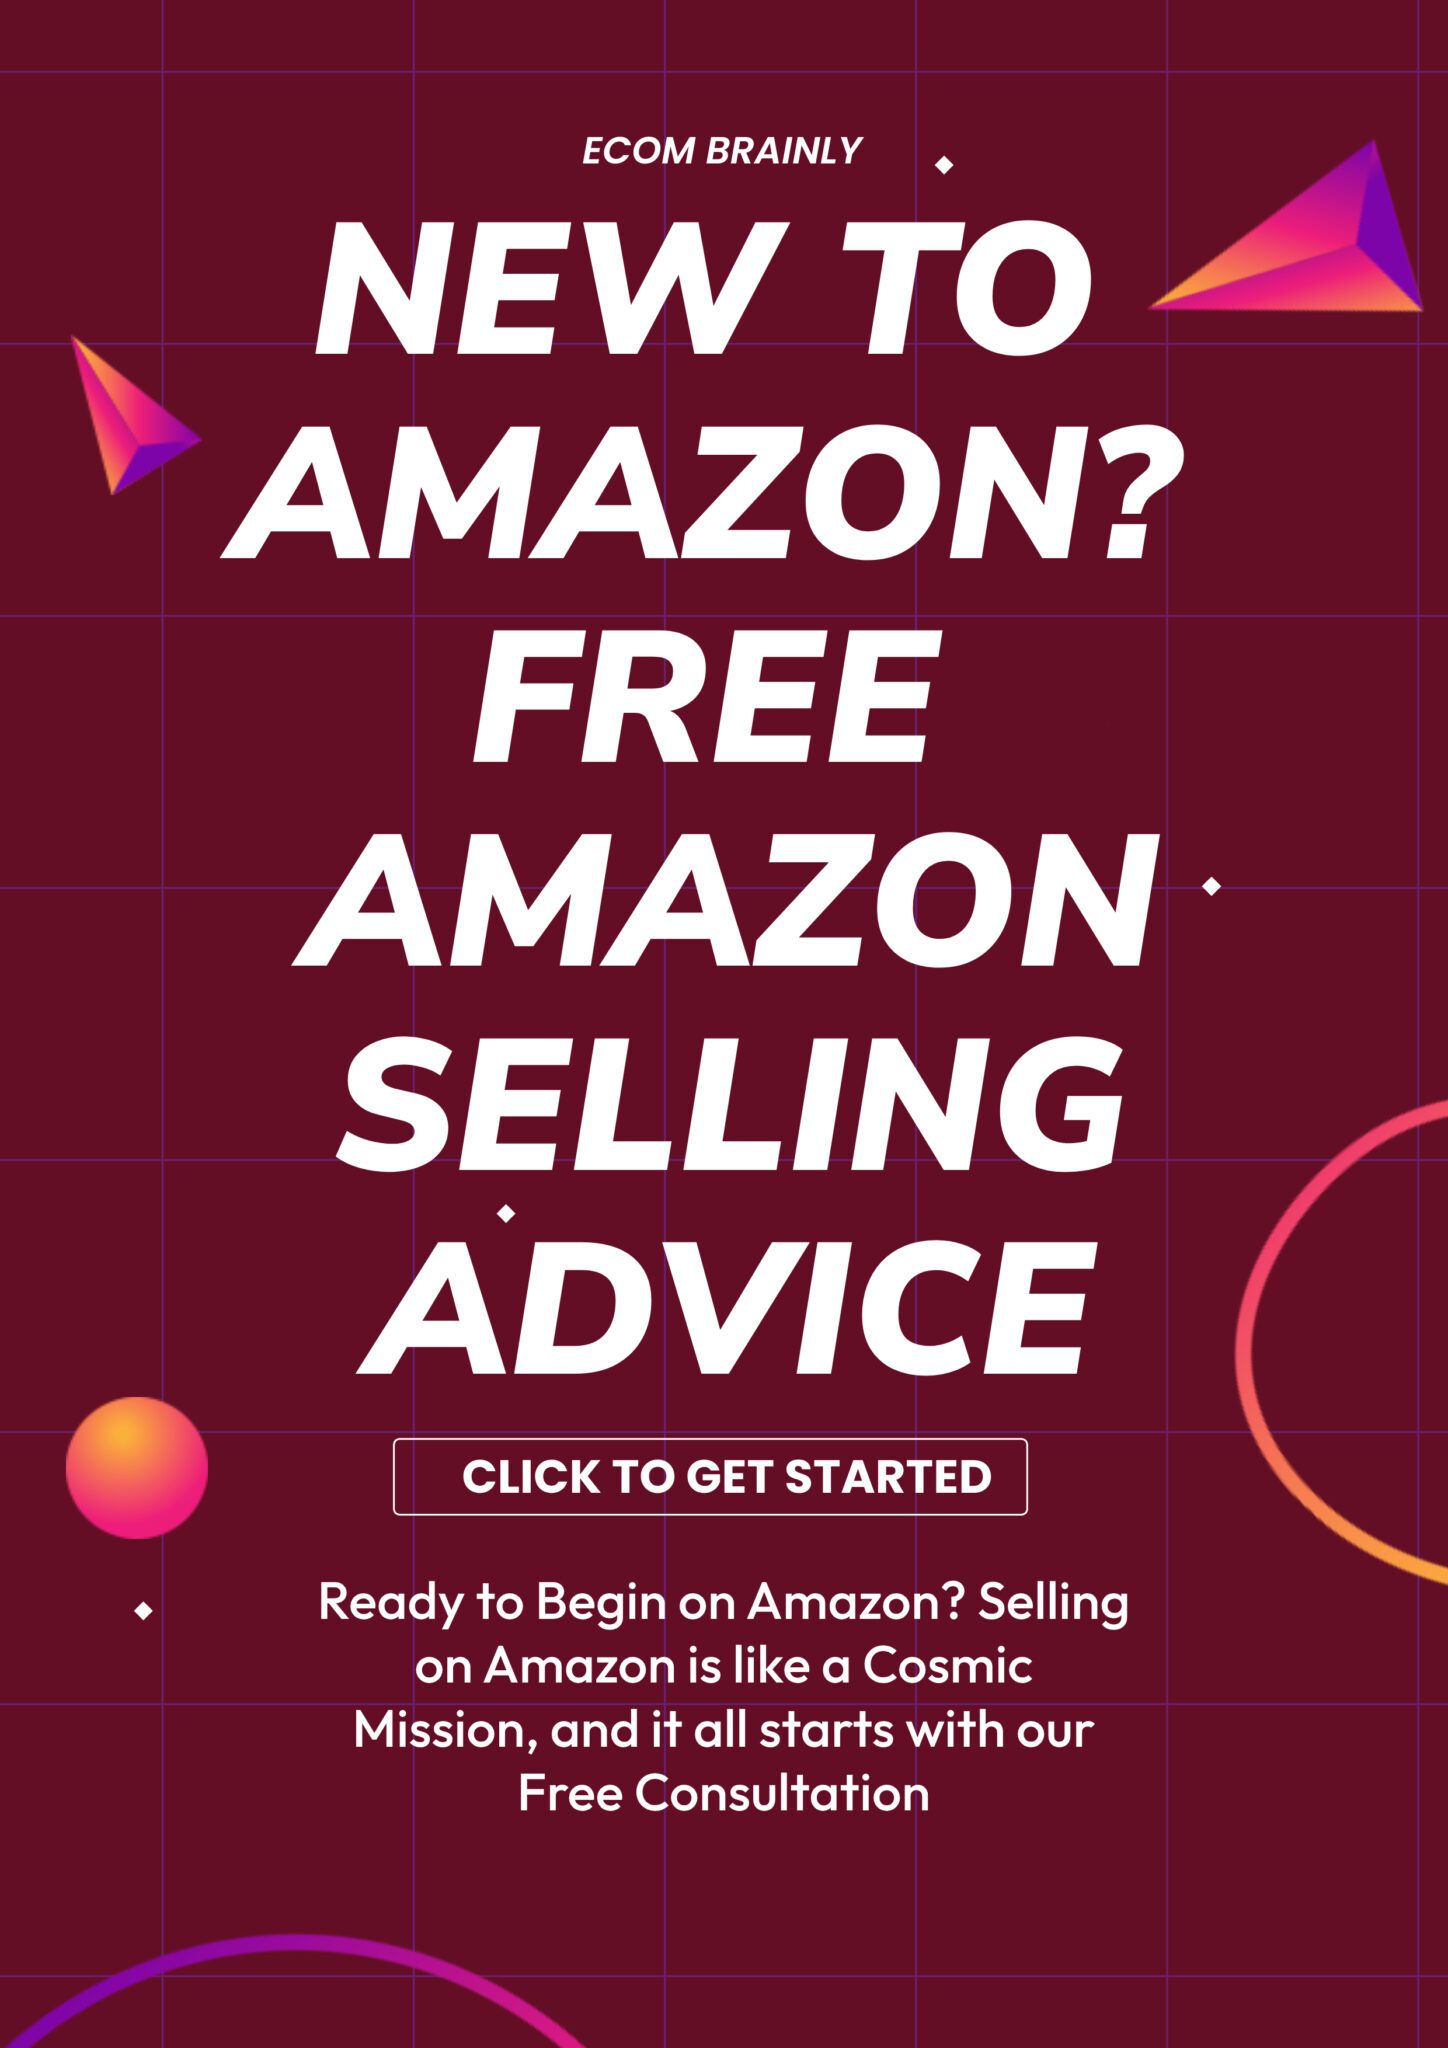 How To Start Selling on Amazon